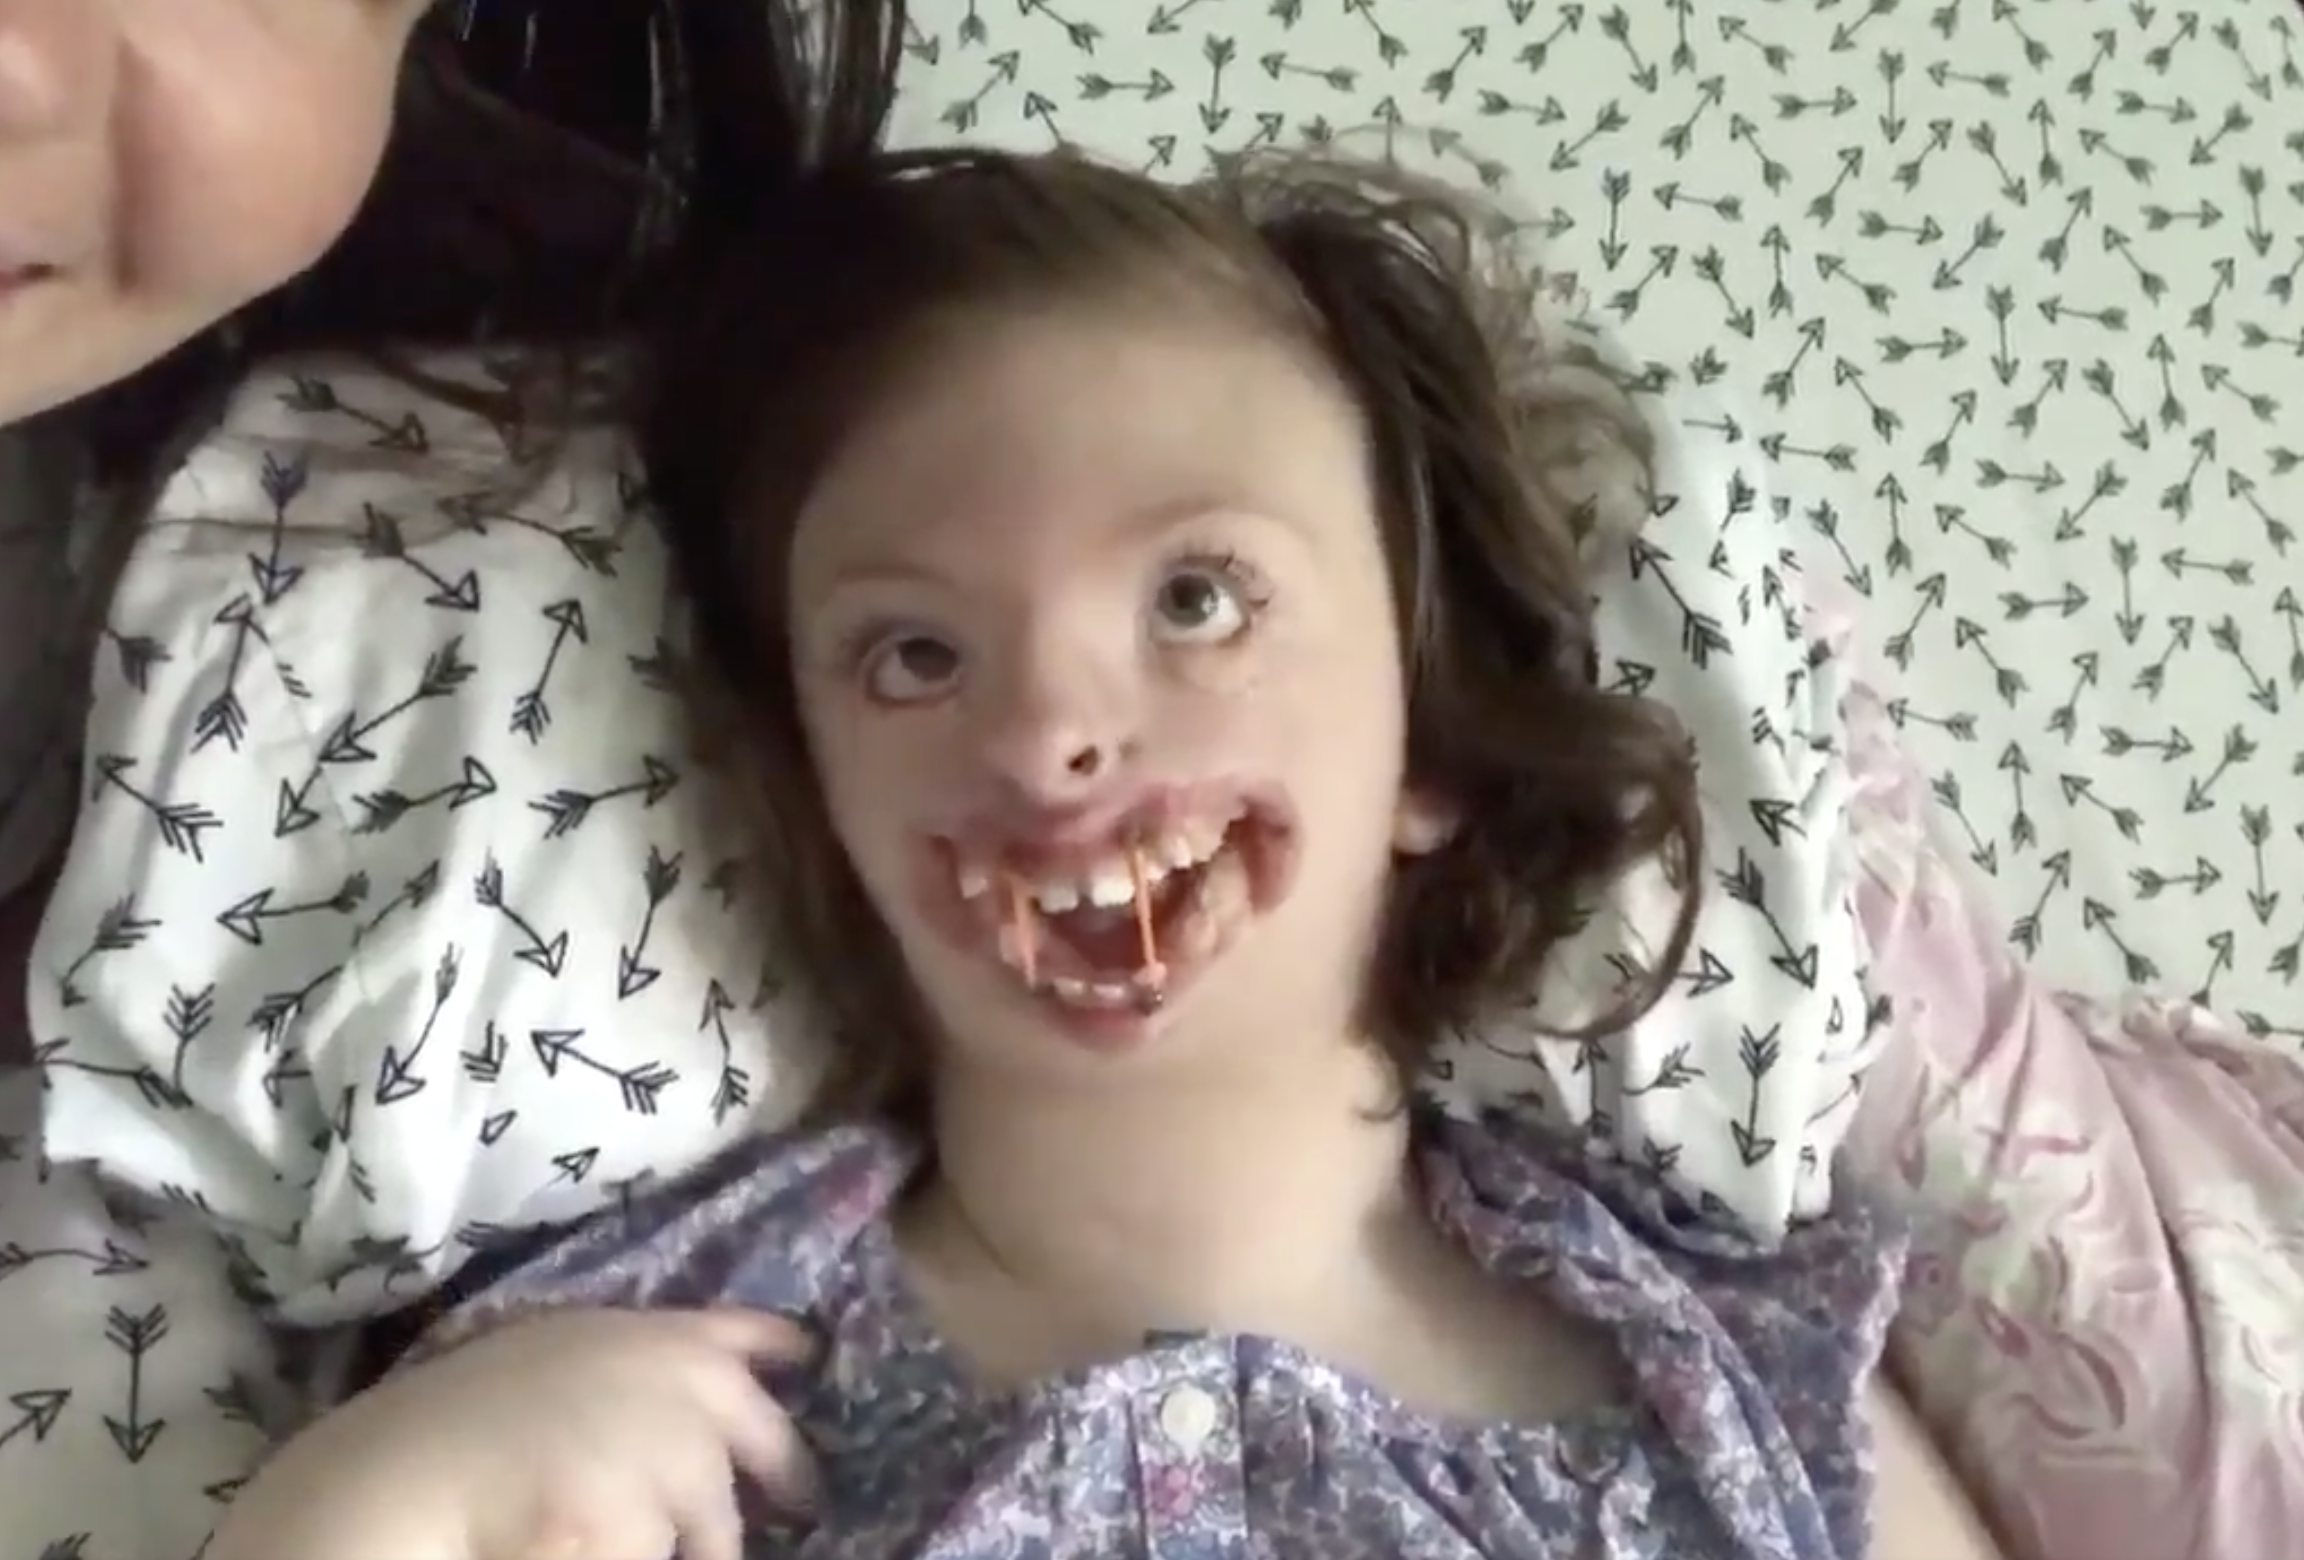 Girl with brain damage who suffered vile online abuse over her facial deformities has died aged 10